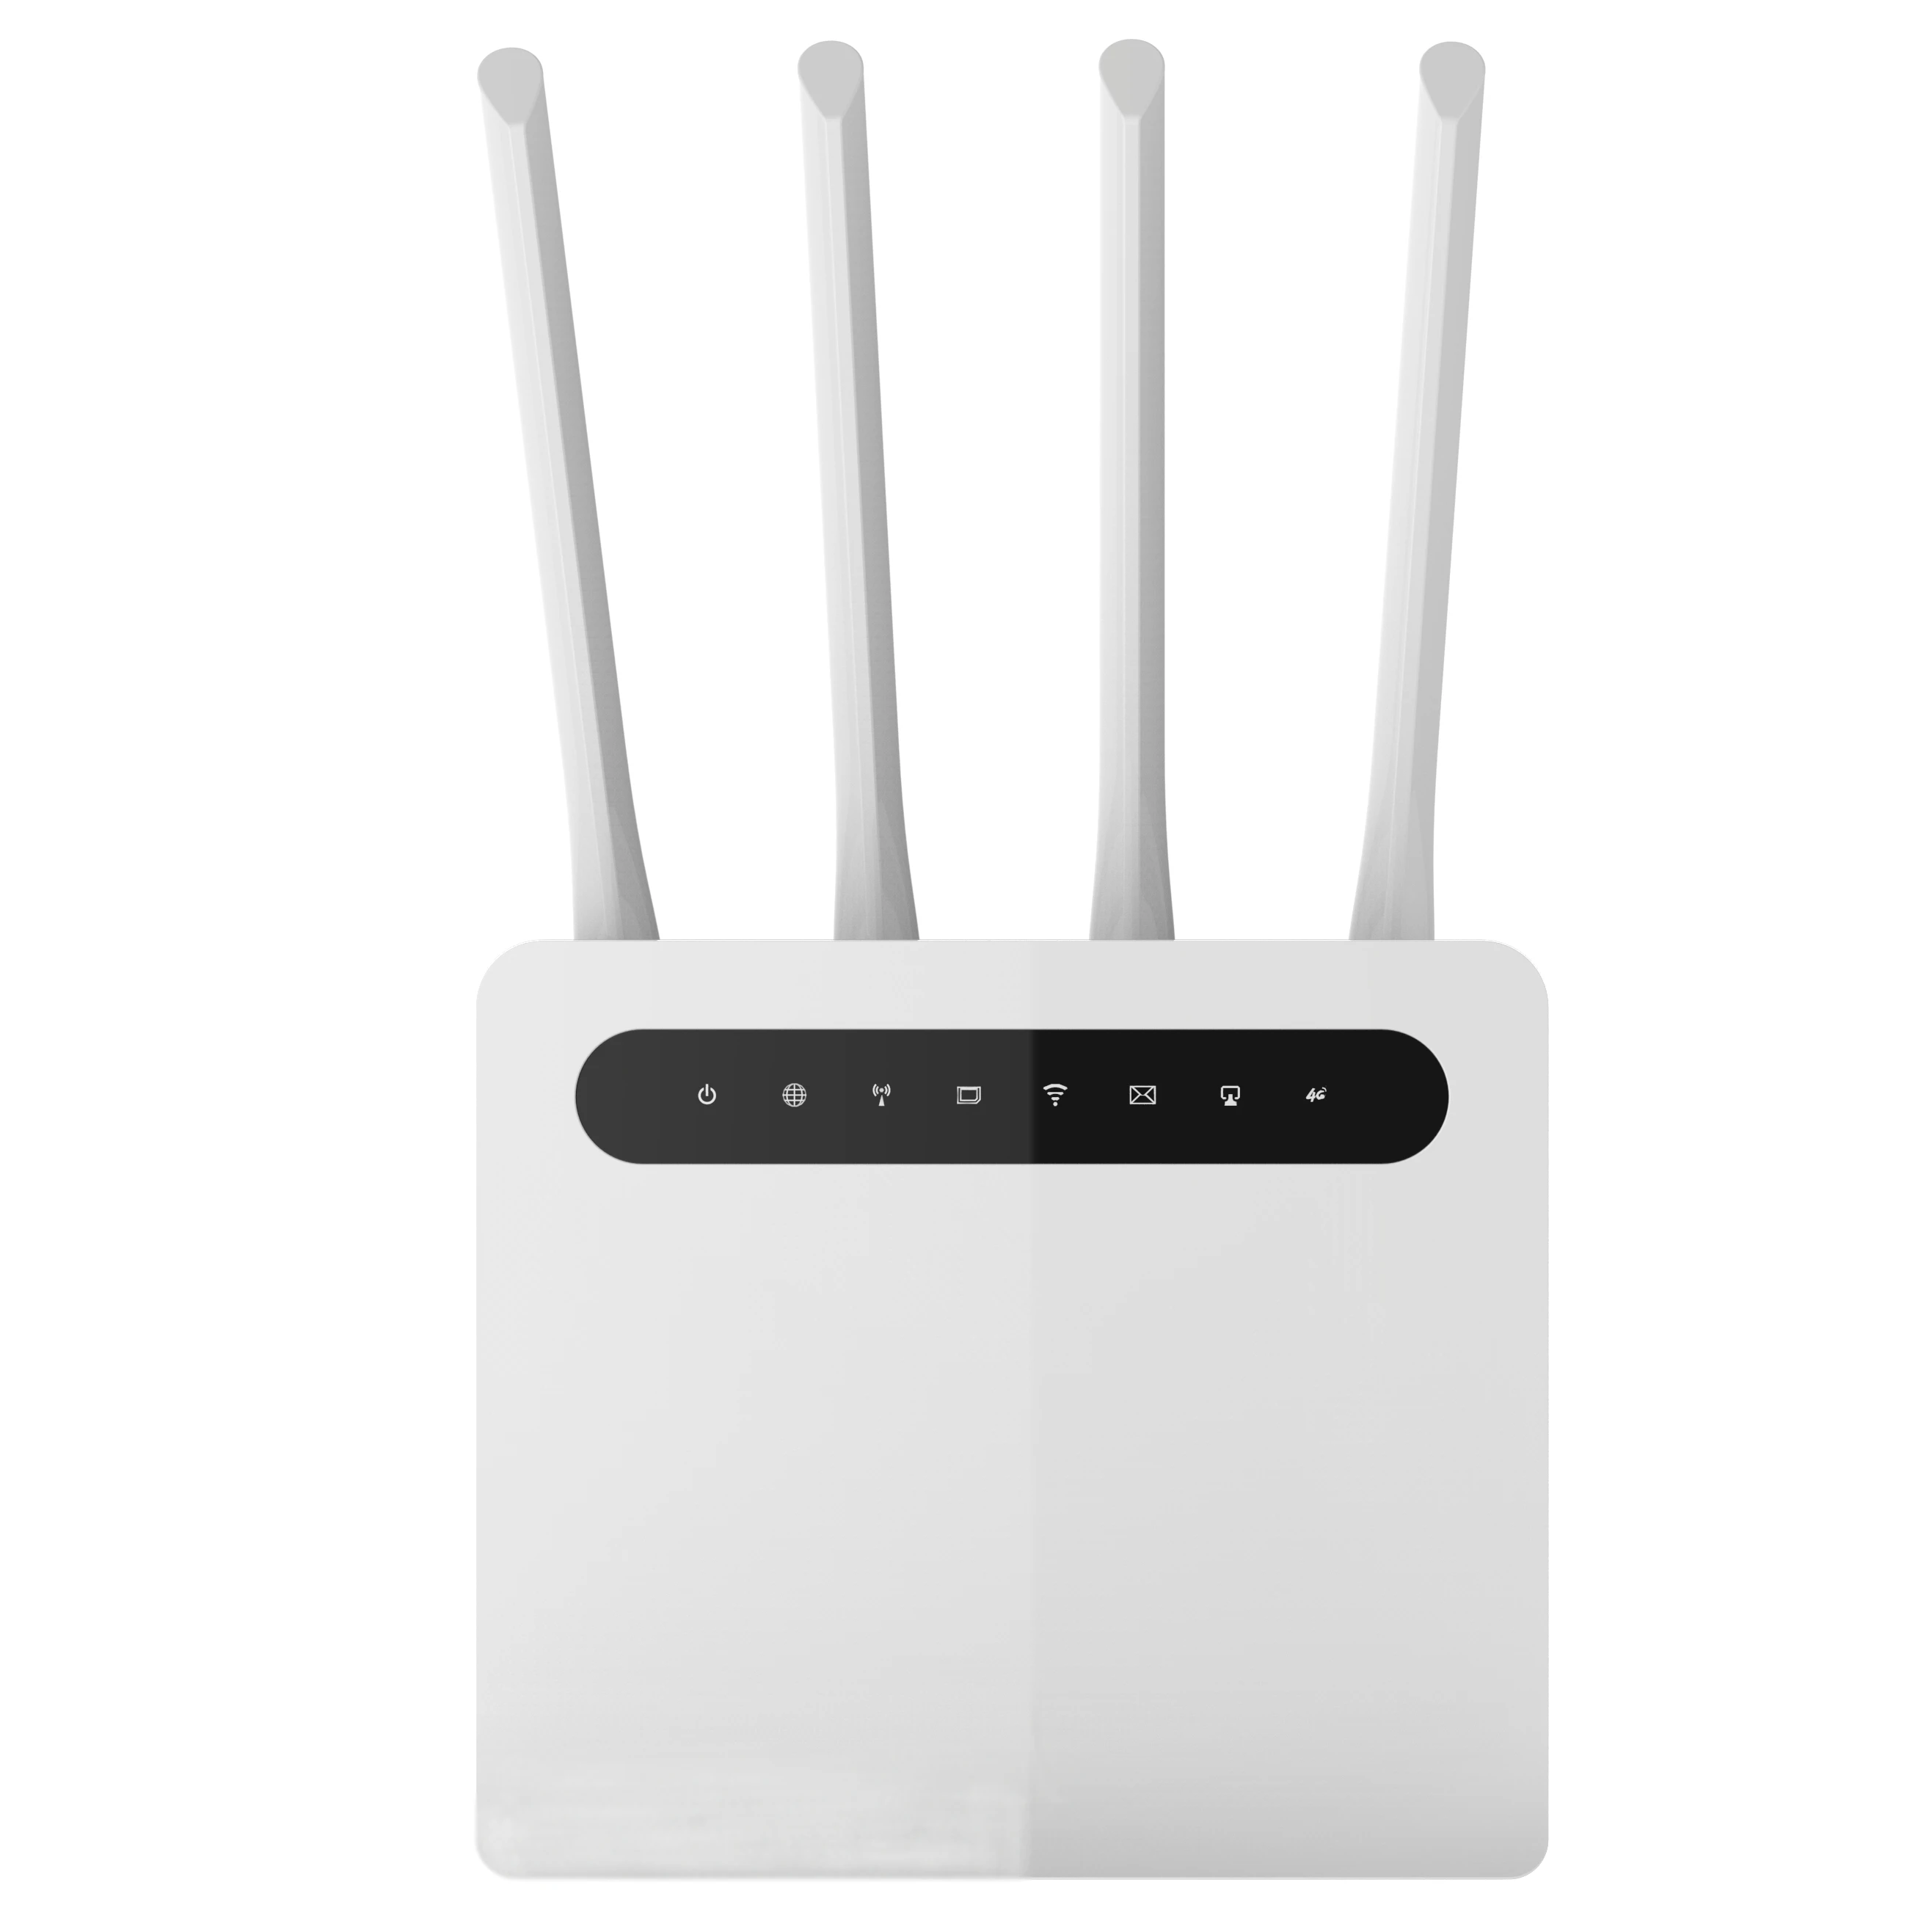 

4G Router SUNCOMM CP6 External Antenna Indoor CAT6 Unlocked Wireless Router with SIM Card 4G Modem, White